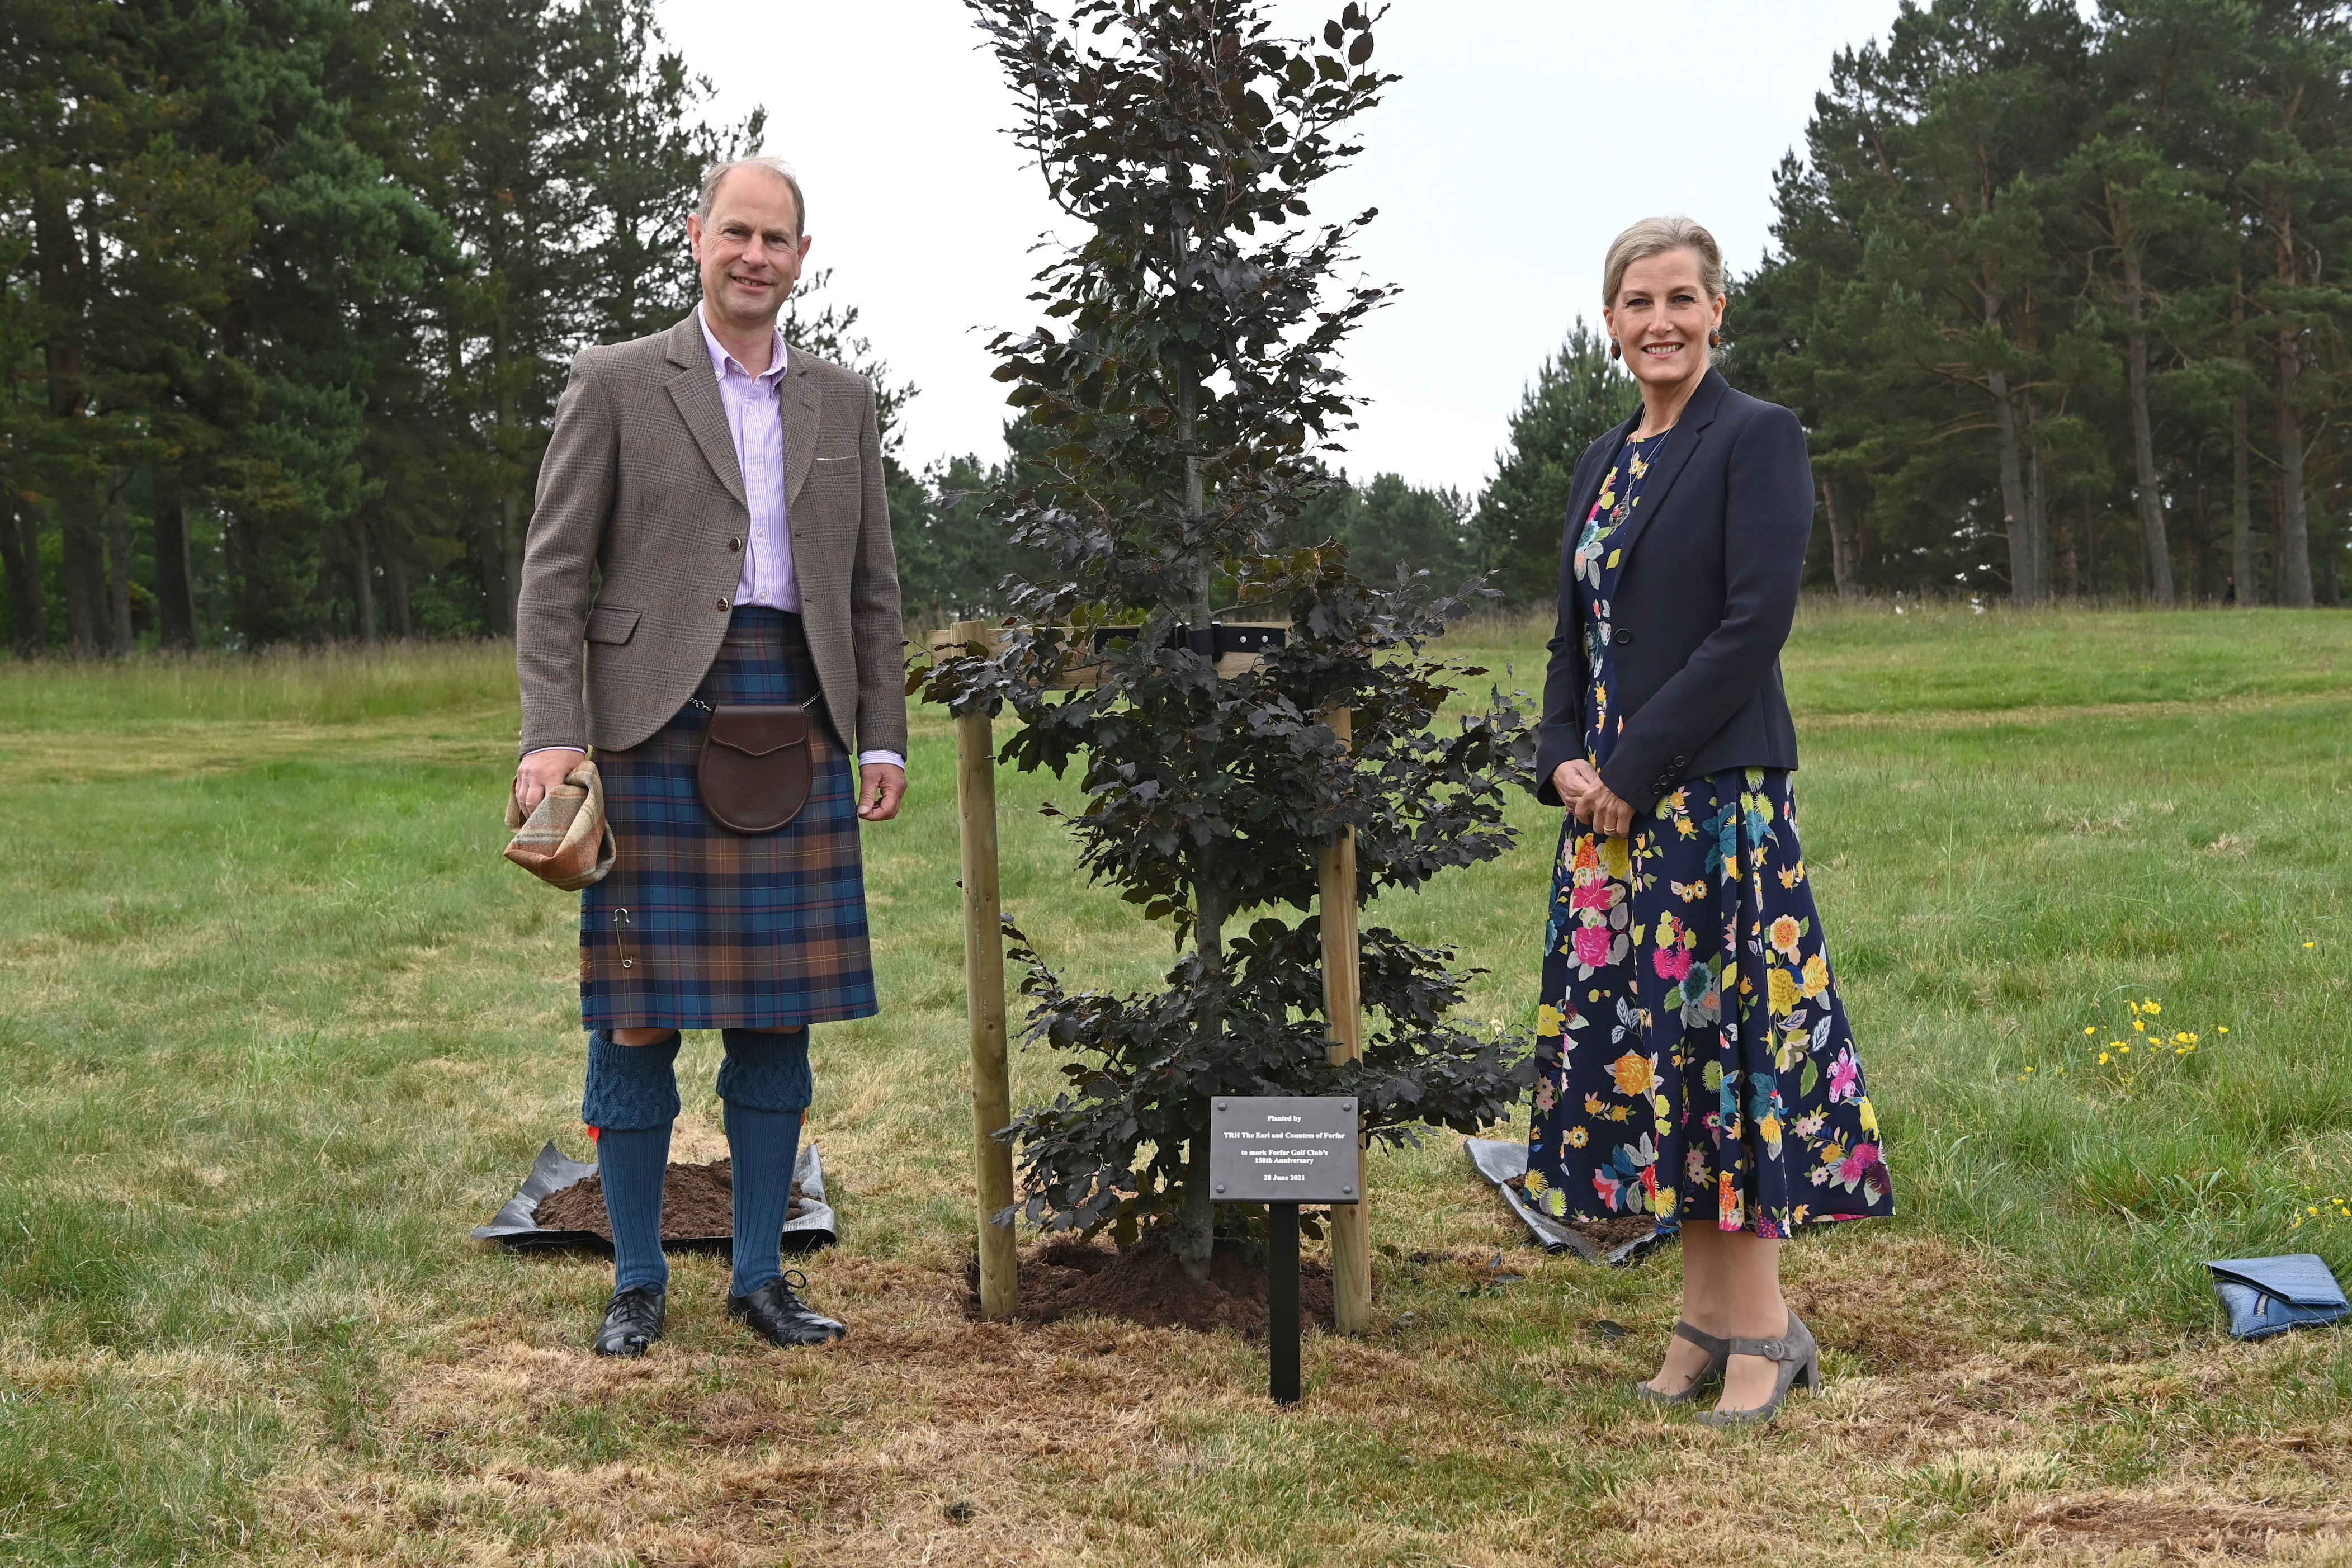 <p>Prince Edward and Sophie, Countess of Wessex visited Scotland's Forfar Golf Club on June 28, 2021, where they planted a tree and unveiled a plaque to mark the 150th Anniversary of the golf club and the first 18-hole golf club in the world.</p>